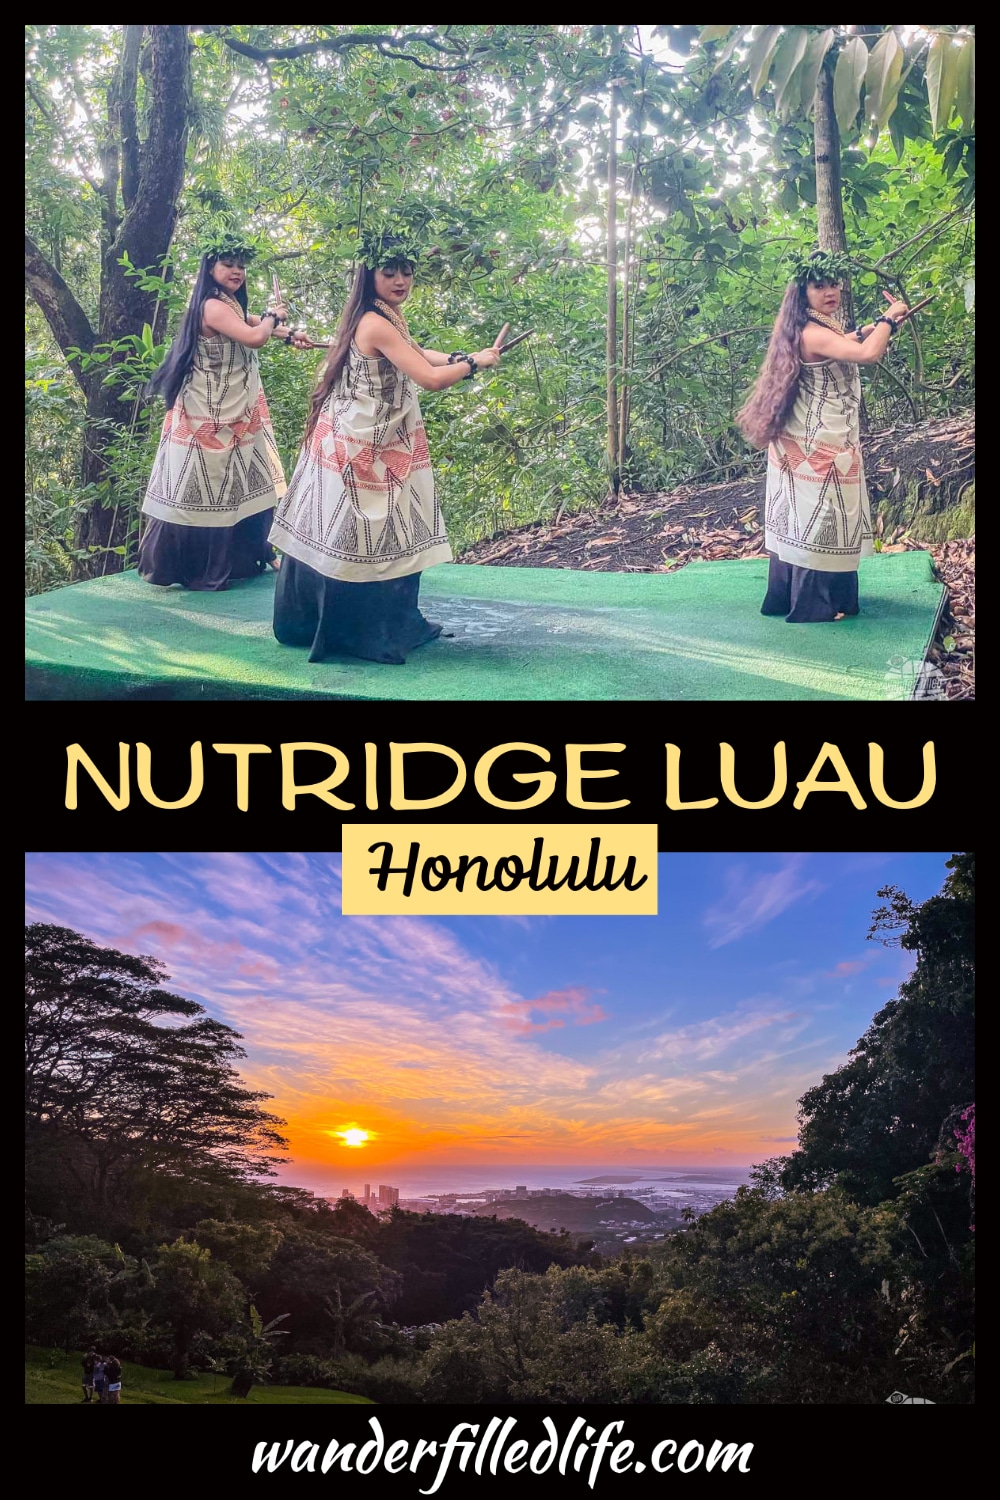 If you're looking for a luau on Oahu, you can't go wrong with the Experience Nutridge luau. This small luau is more family party than show.